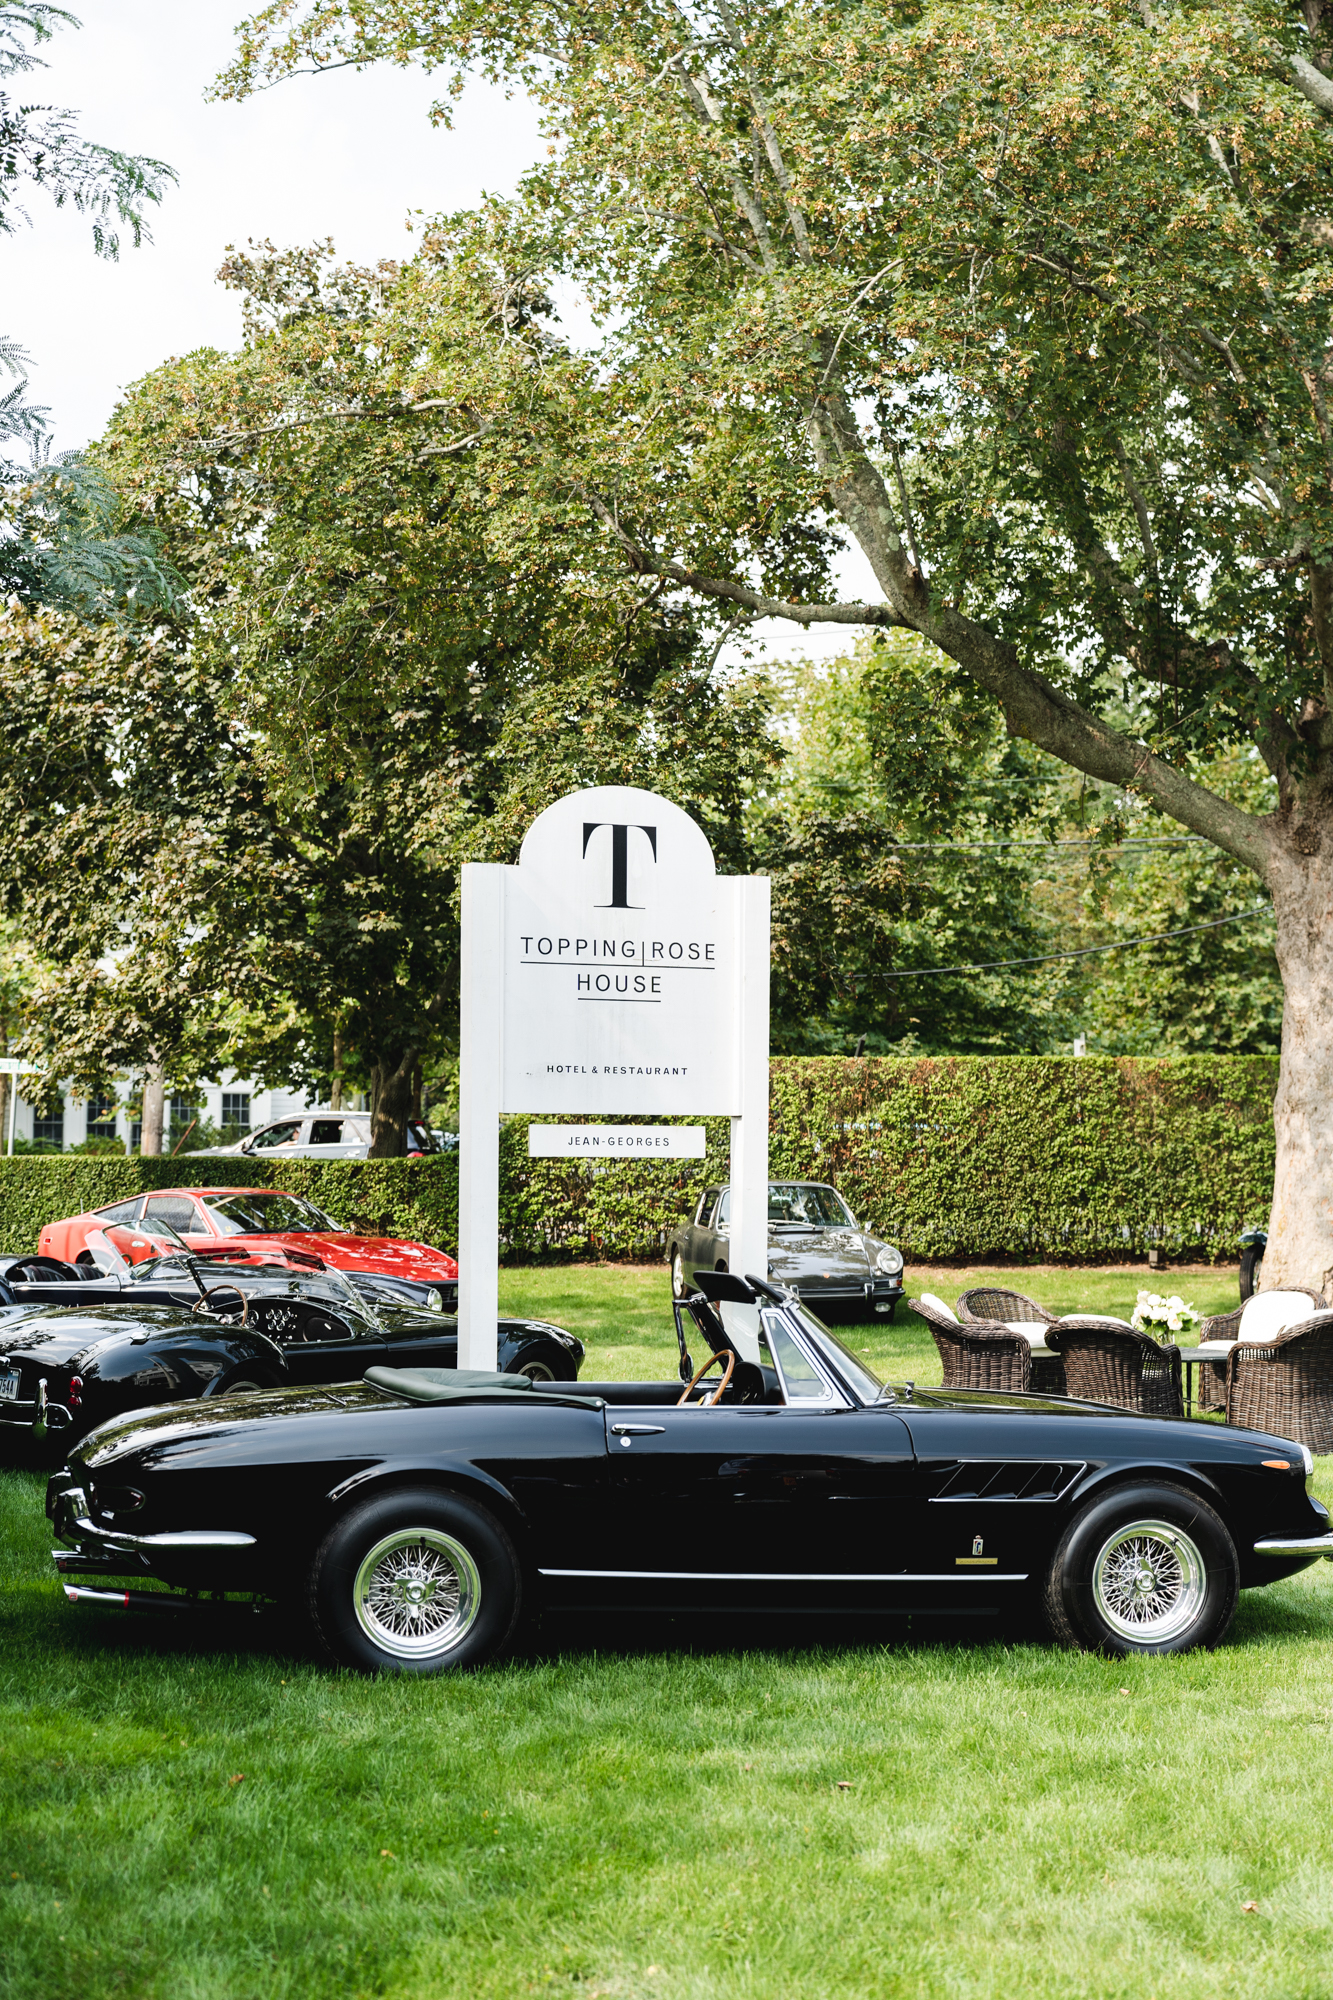 Car enthusiasts gathered at Topping Rose House on Sunday, September 17